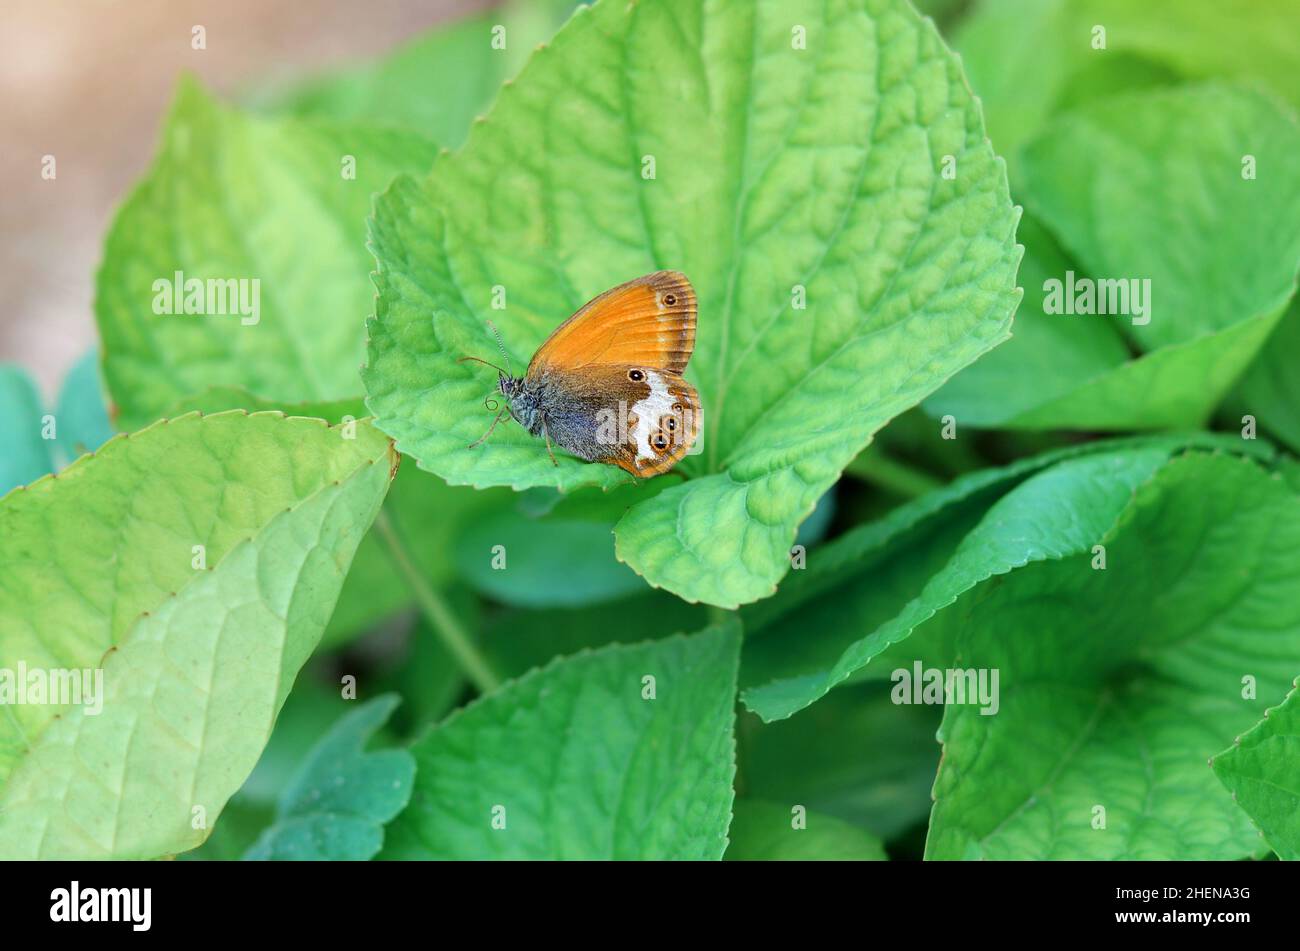 Coenonympha arcania or pearly heath, is a butterfly species belonging to the family Nymphalidae. Small orange butterfly sitting on a green leaves. Stock Photo